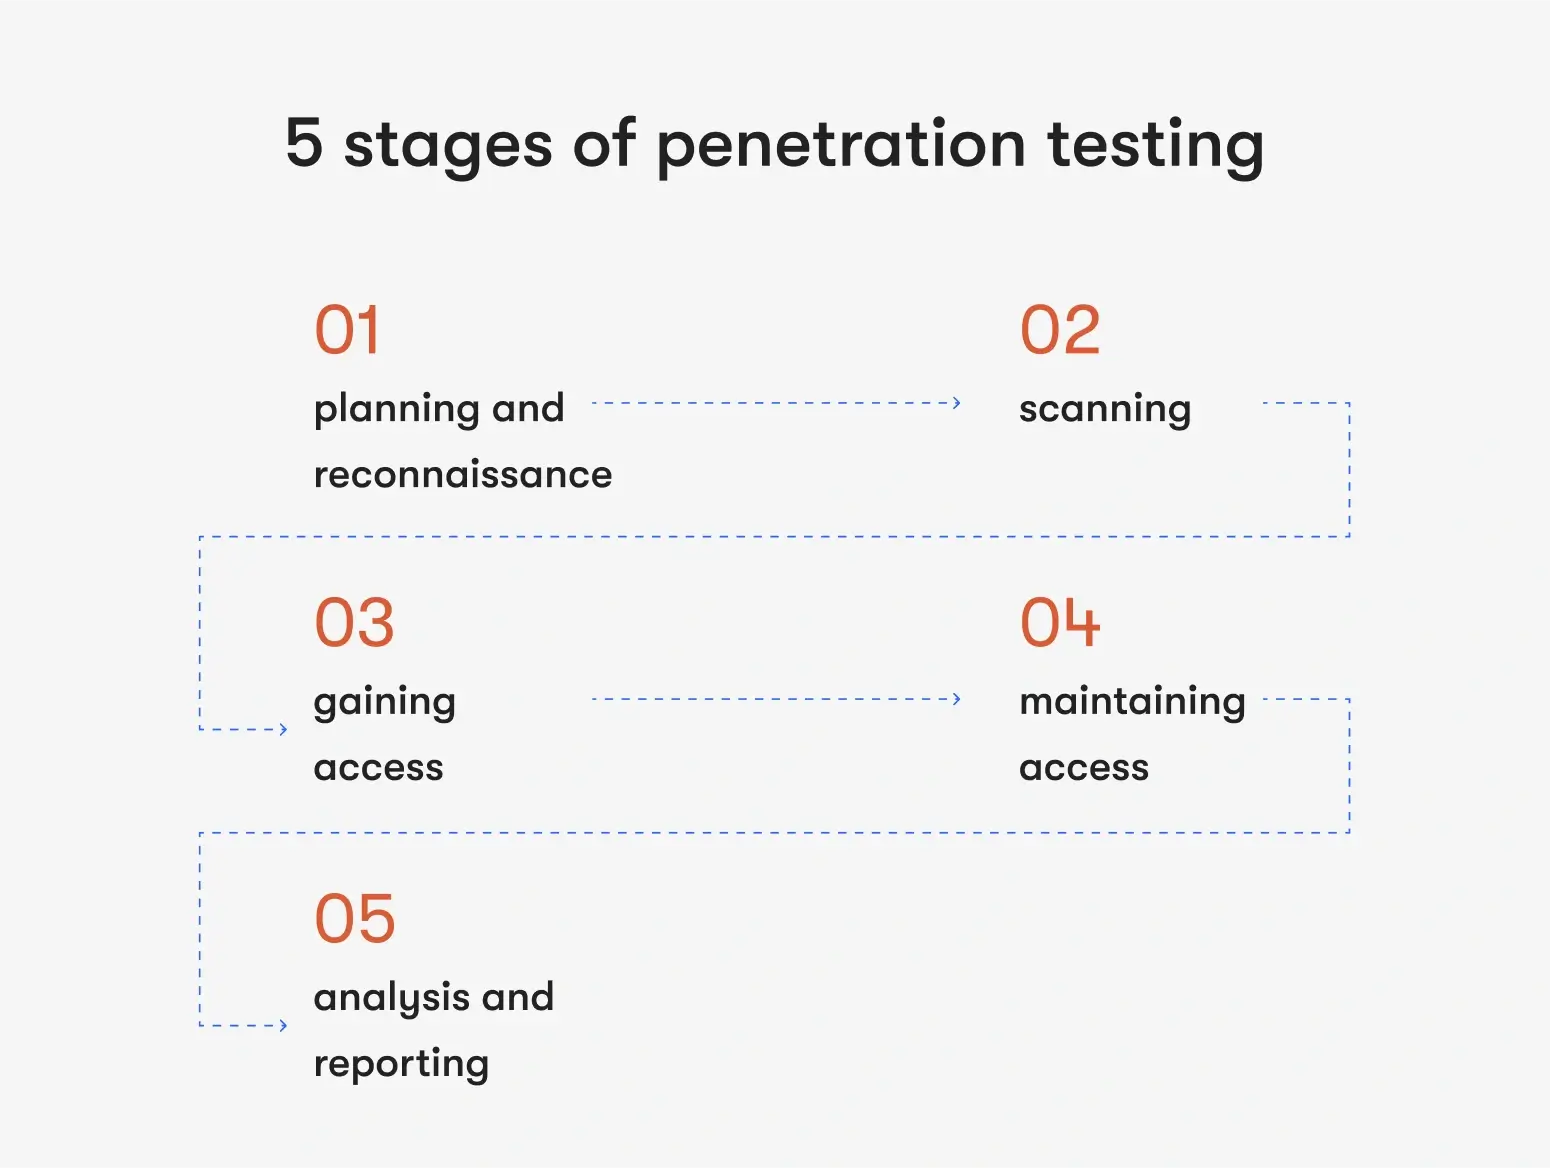 stages of penetration testing as a type of network security assessment